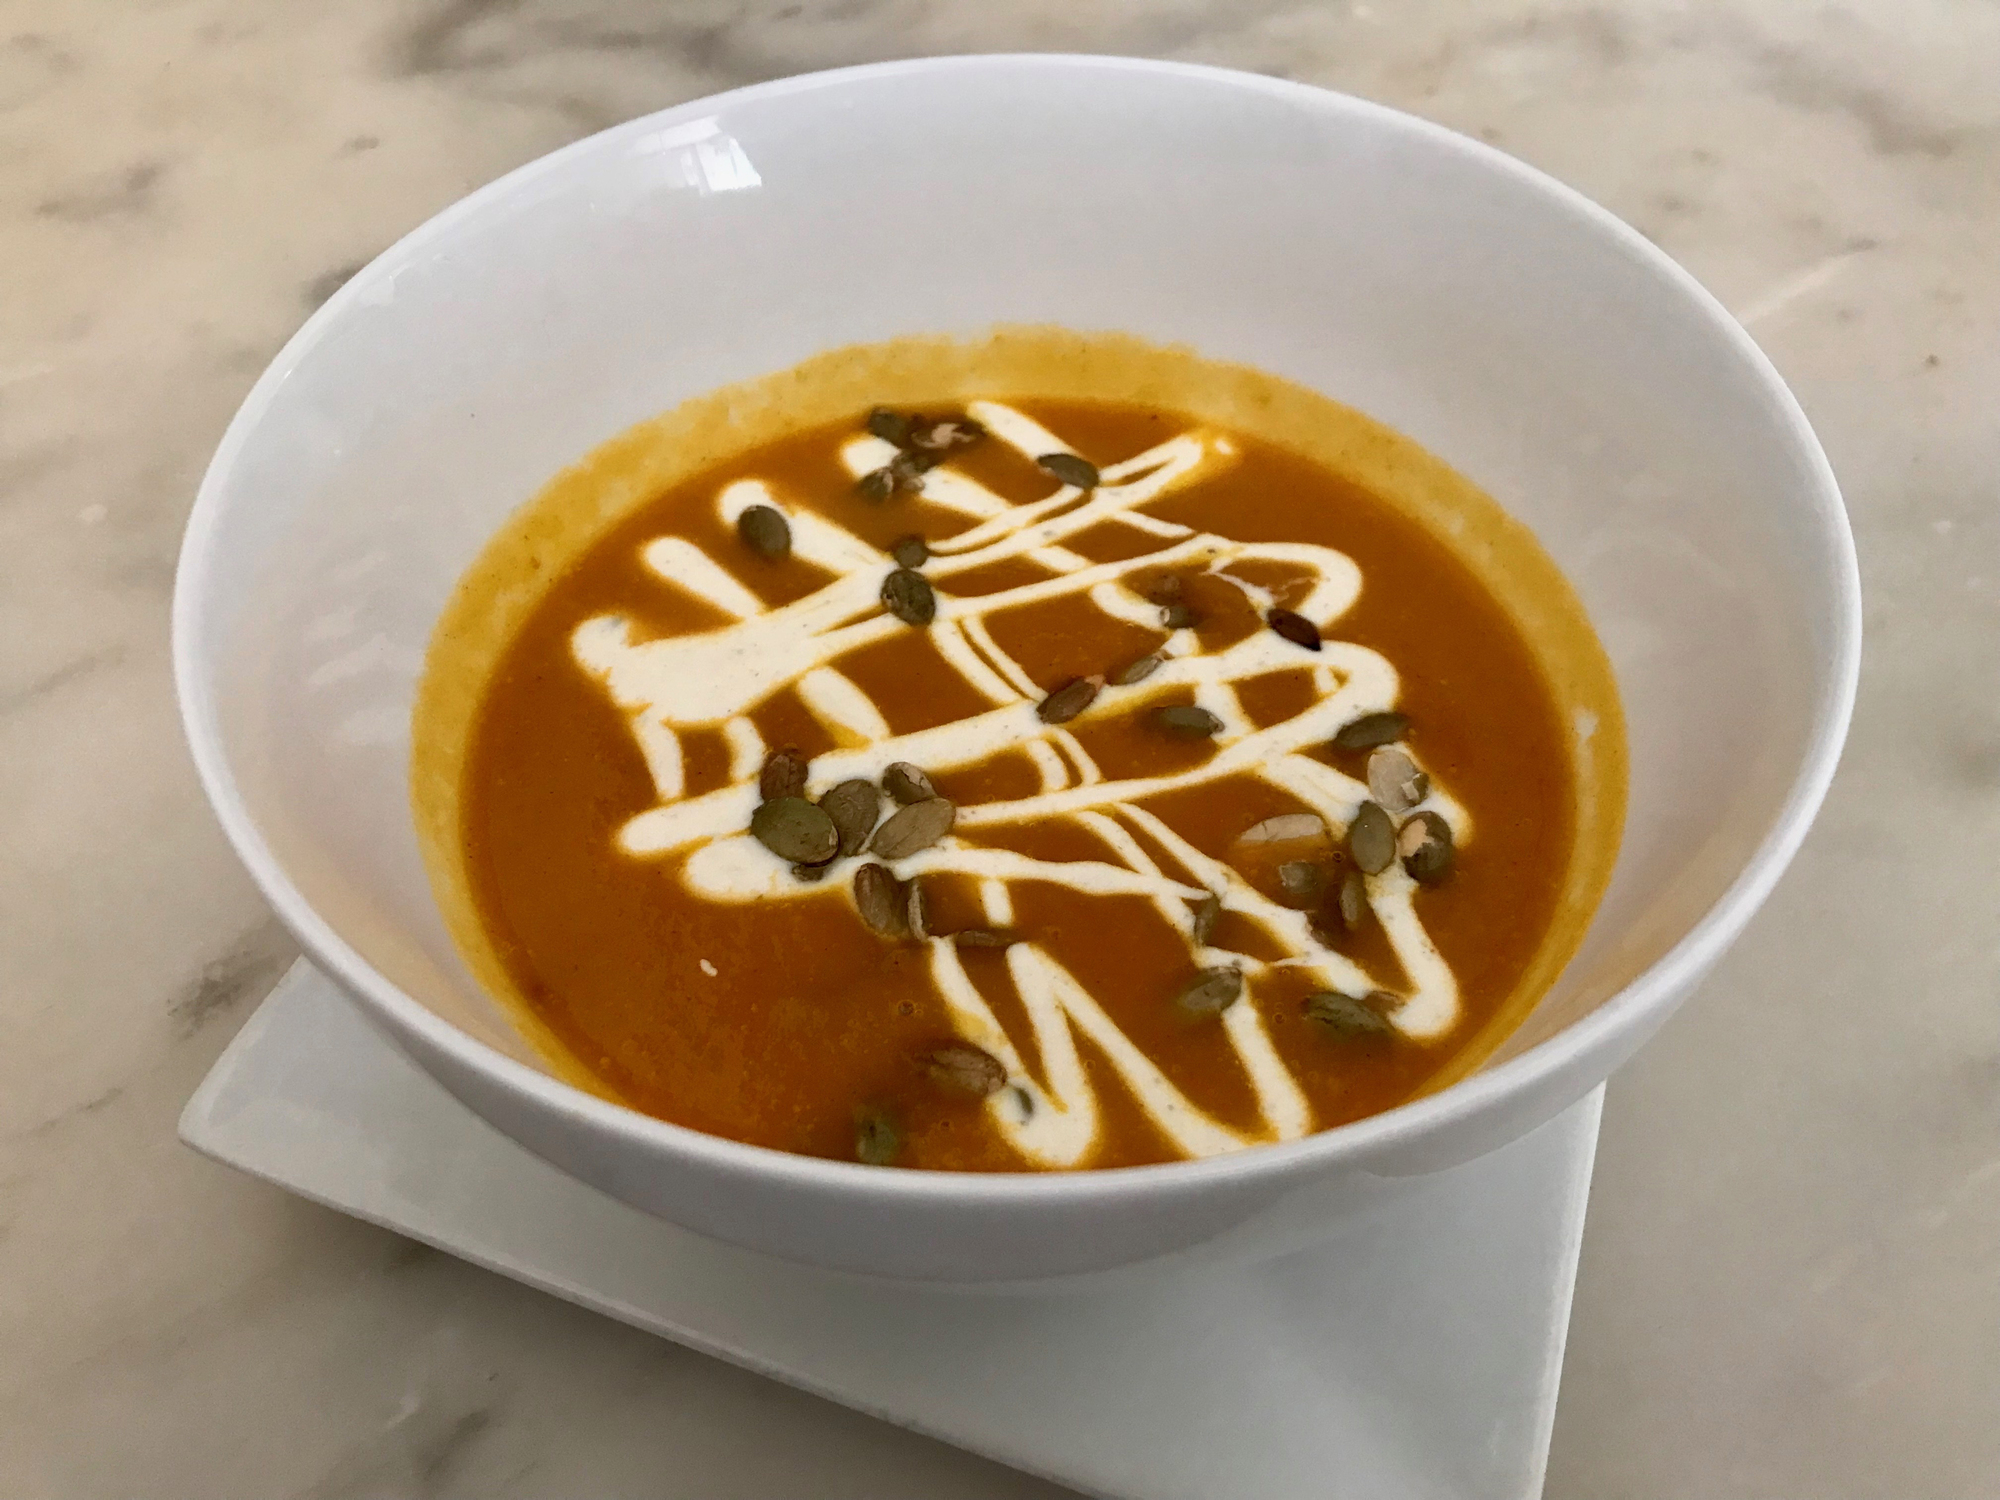 Moroccan carrot soup from Tilia in Minneapolis.